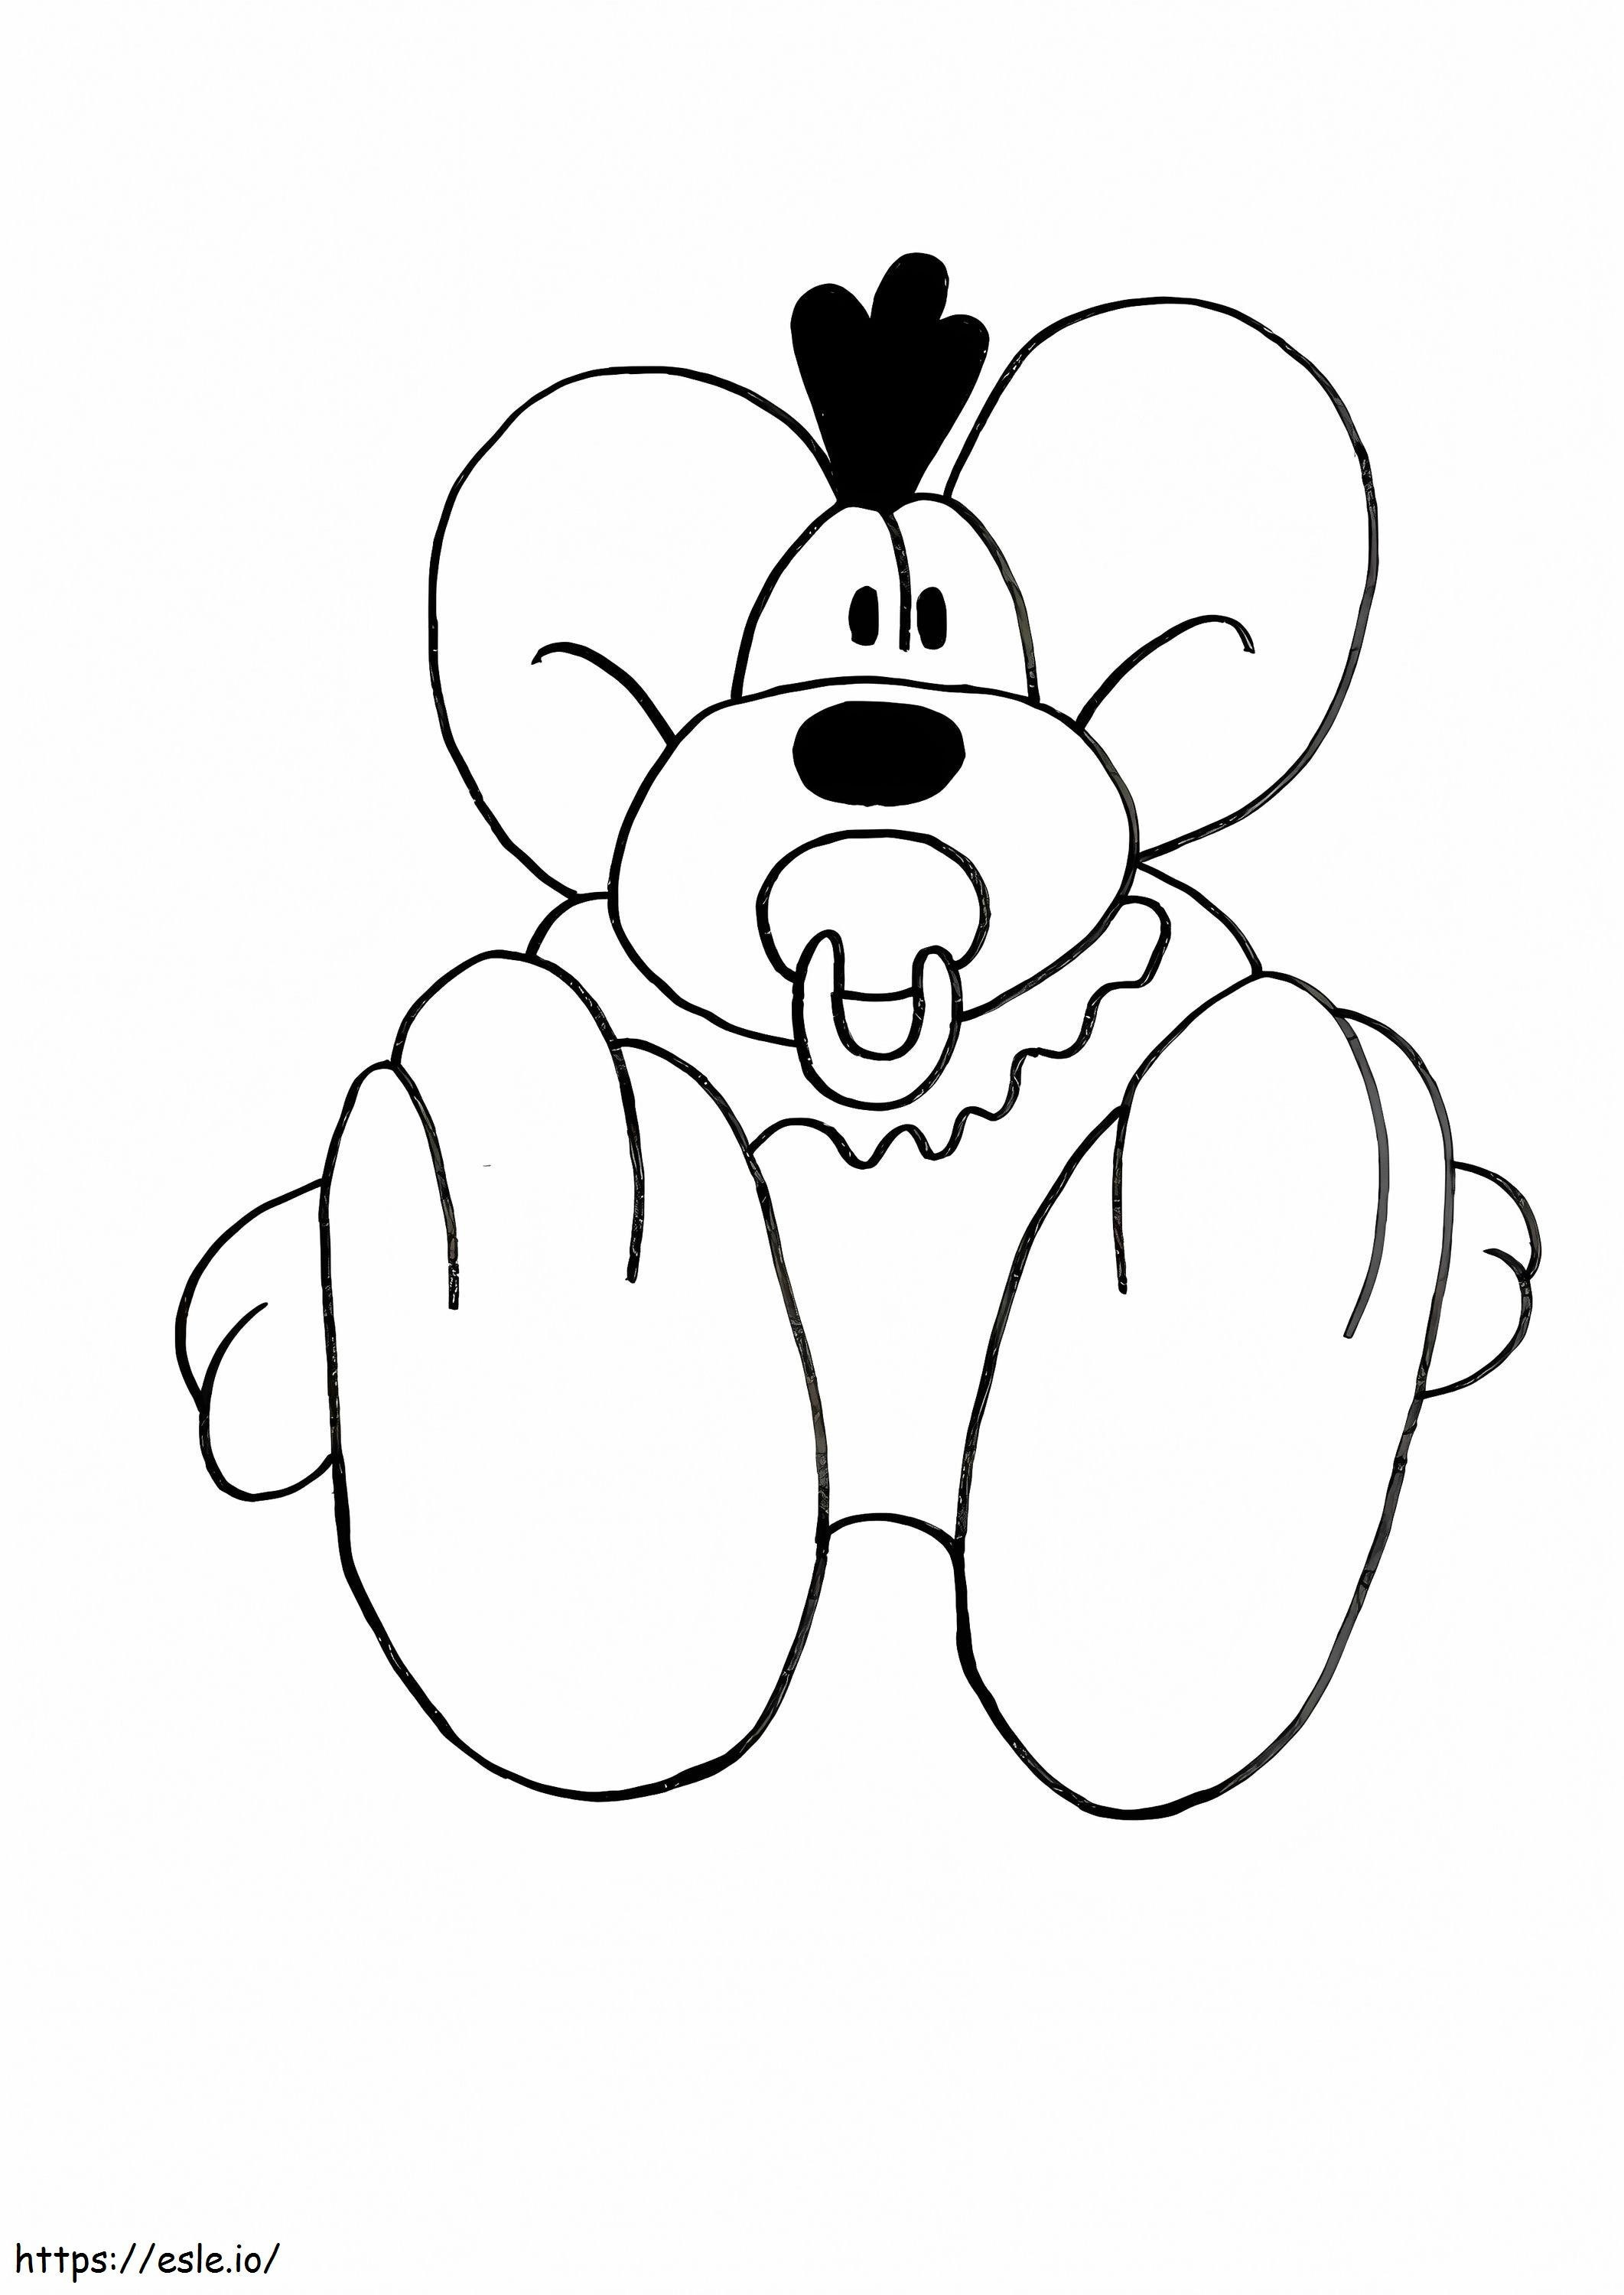 Diddle 4 coloring page